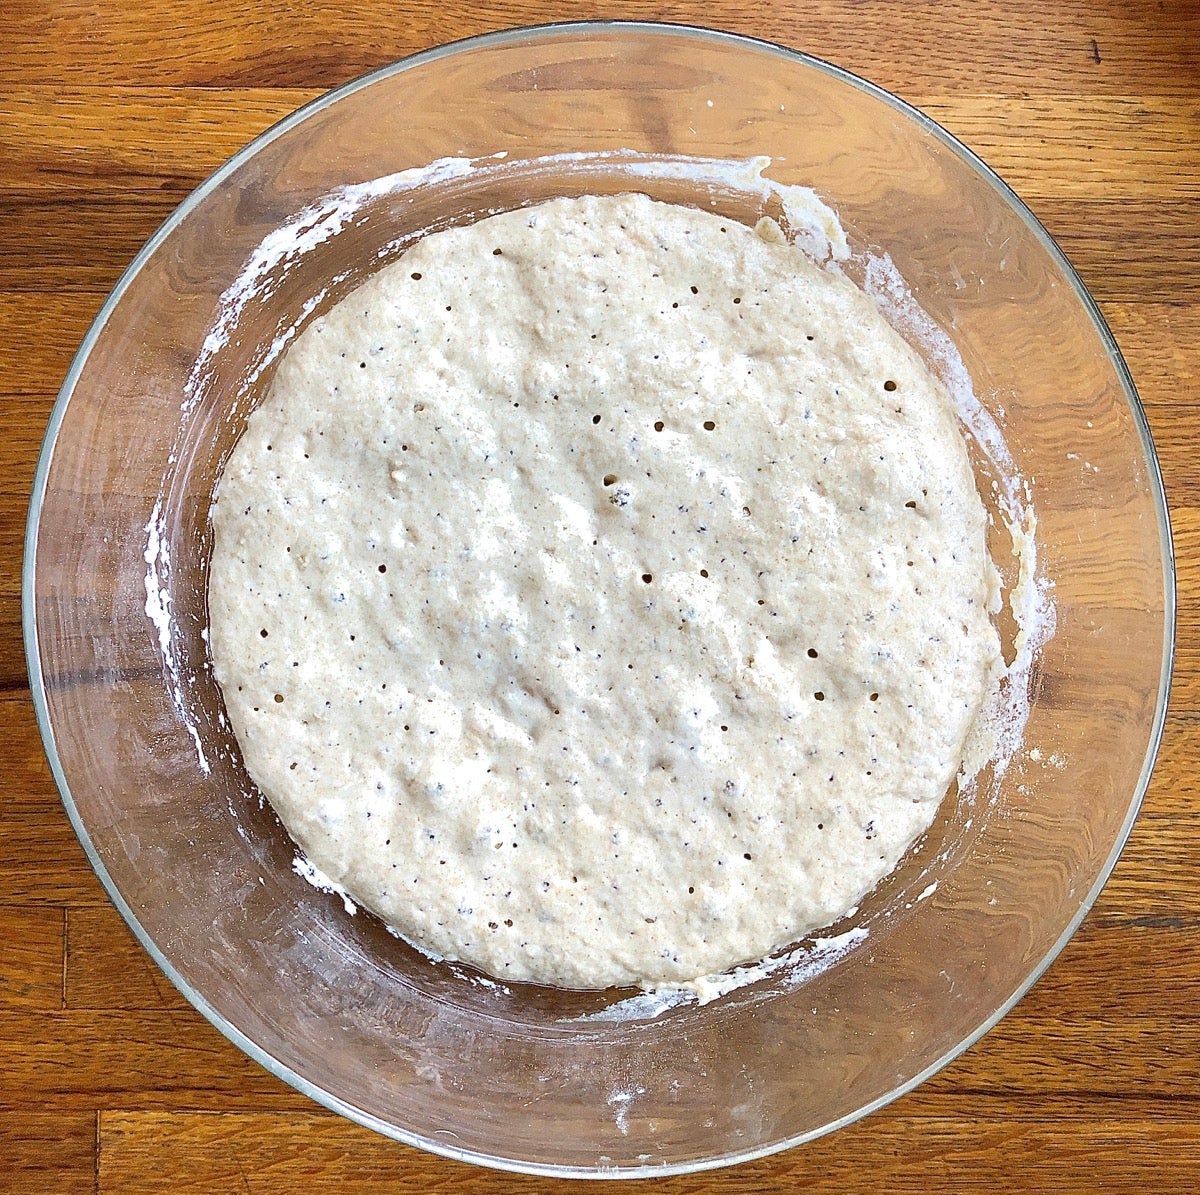 Risen preferment for Greek Olive and Onion Bread